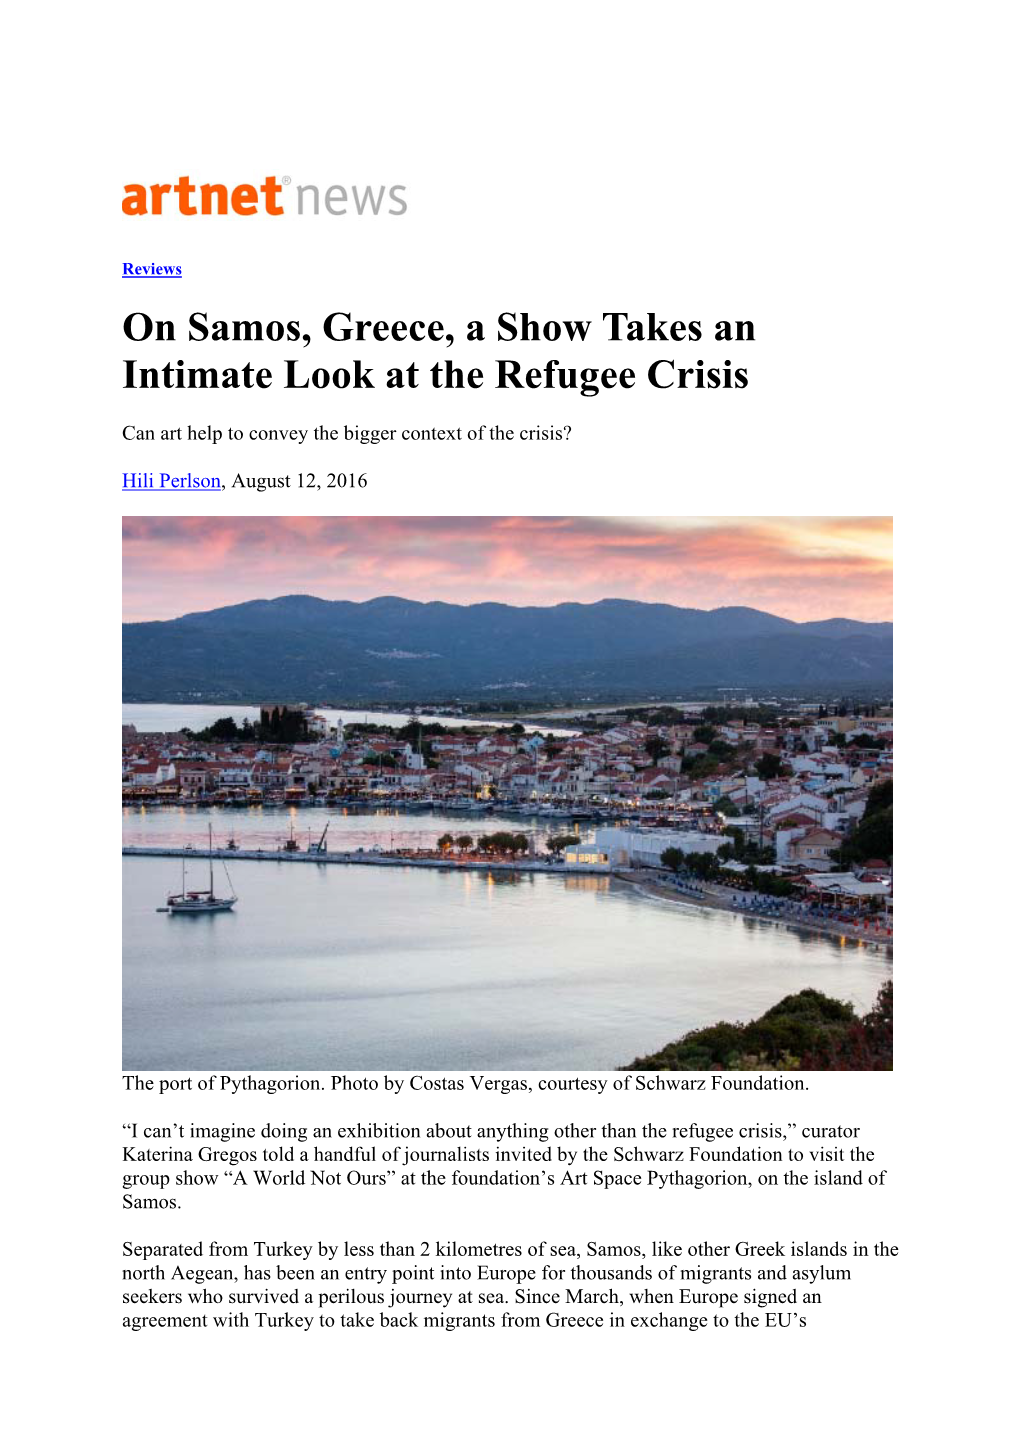 On Samos, Greece, a Show Takes an Intimate Look at the Refugee Crisis